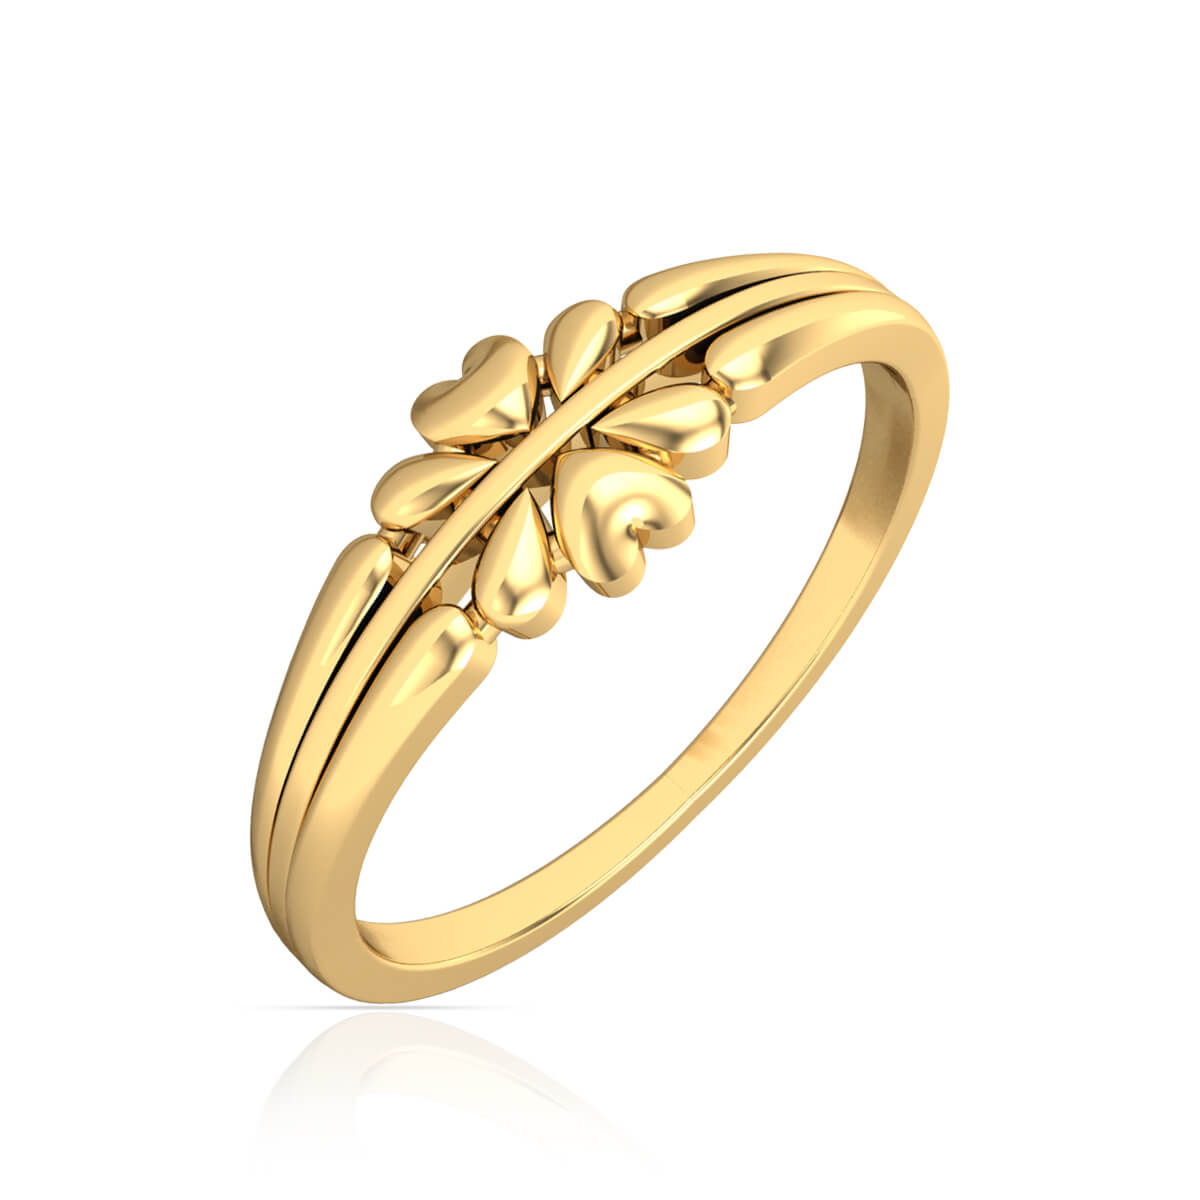 Gold Ring Design For Female With Price | Rose Gold Rings For Women-baongoctrading.com.vn